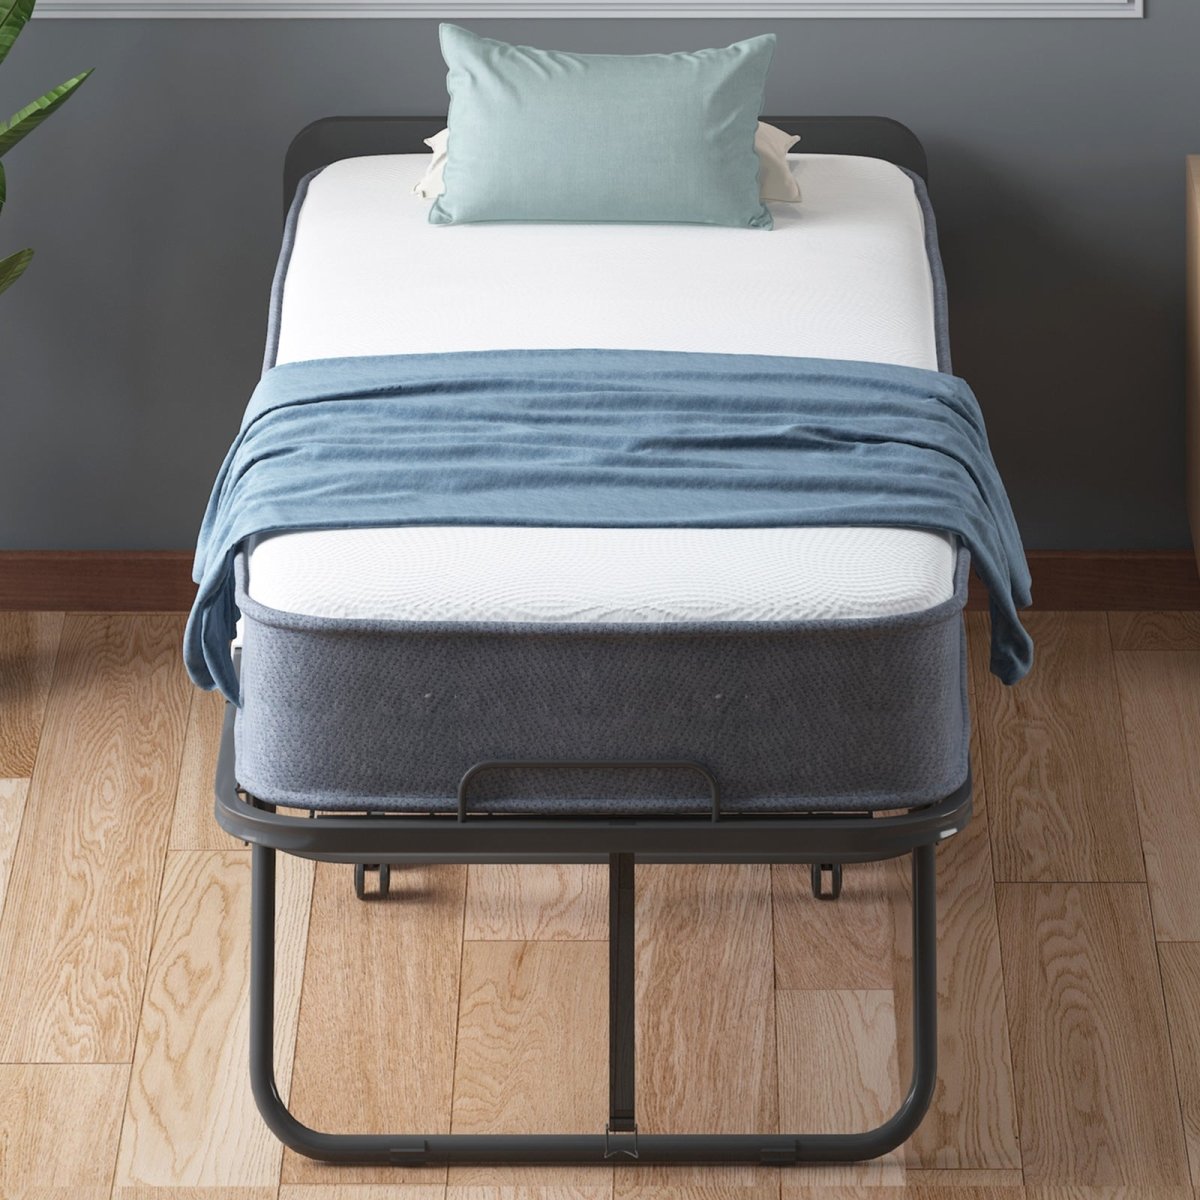 Folding Bed | Guest Bed with Mattress Portable Rollaway - Mjkonebed